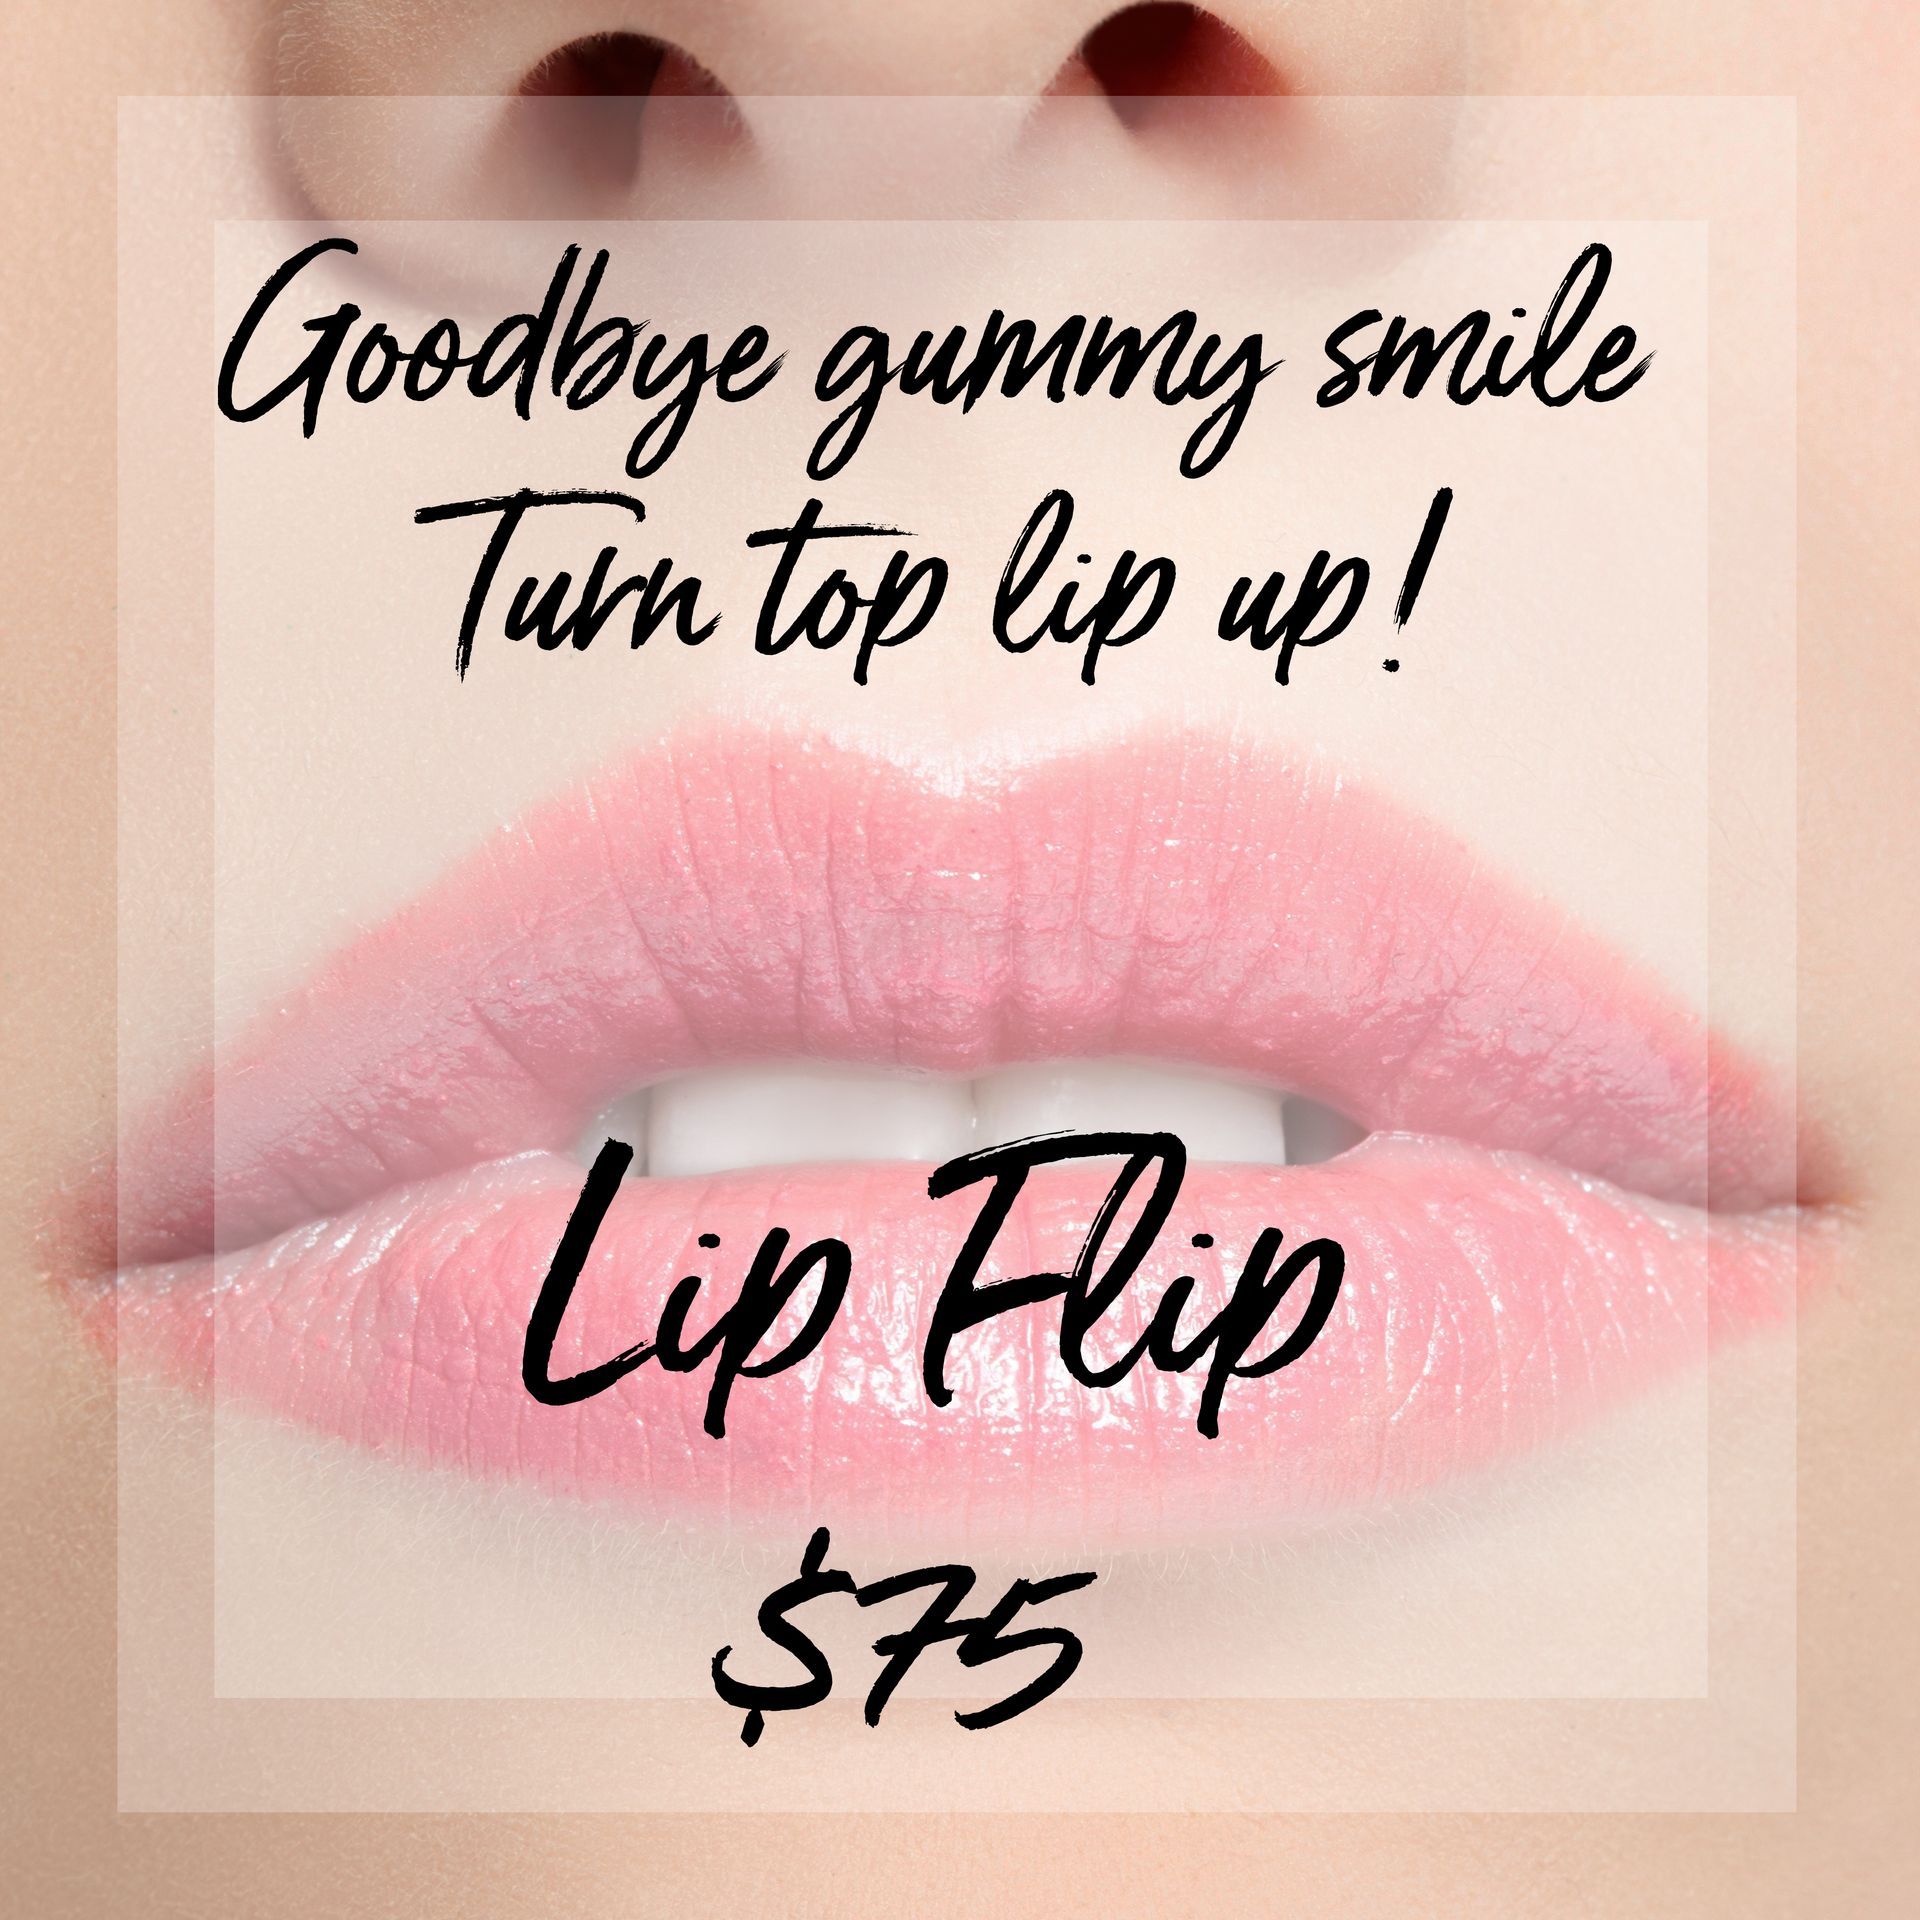 A picture of a woman 's lips with the words goodbye gummy smile turn top lip up